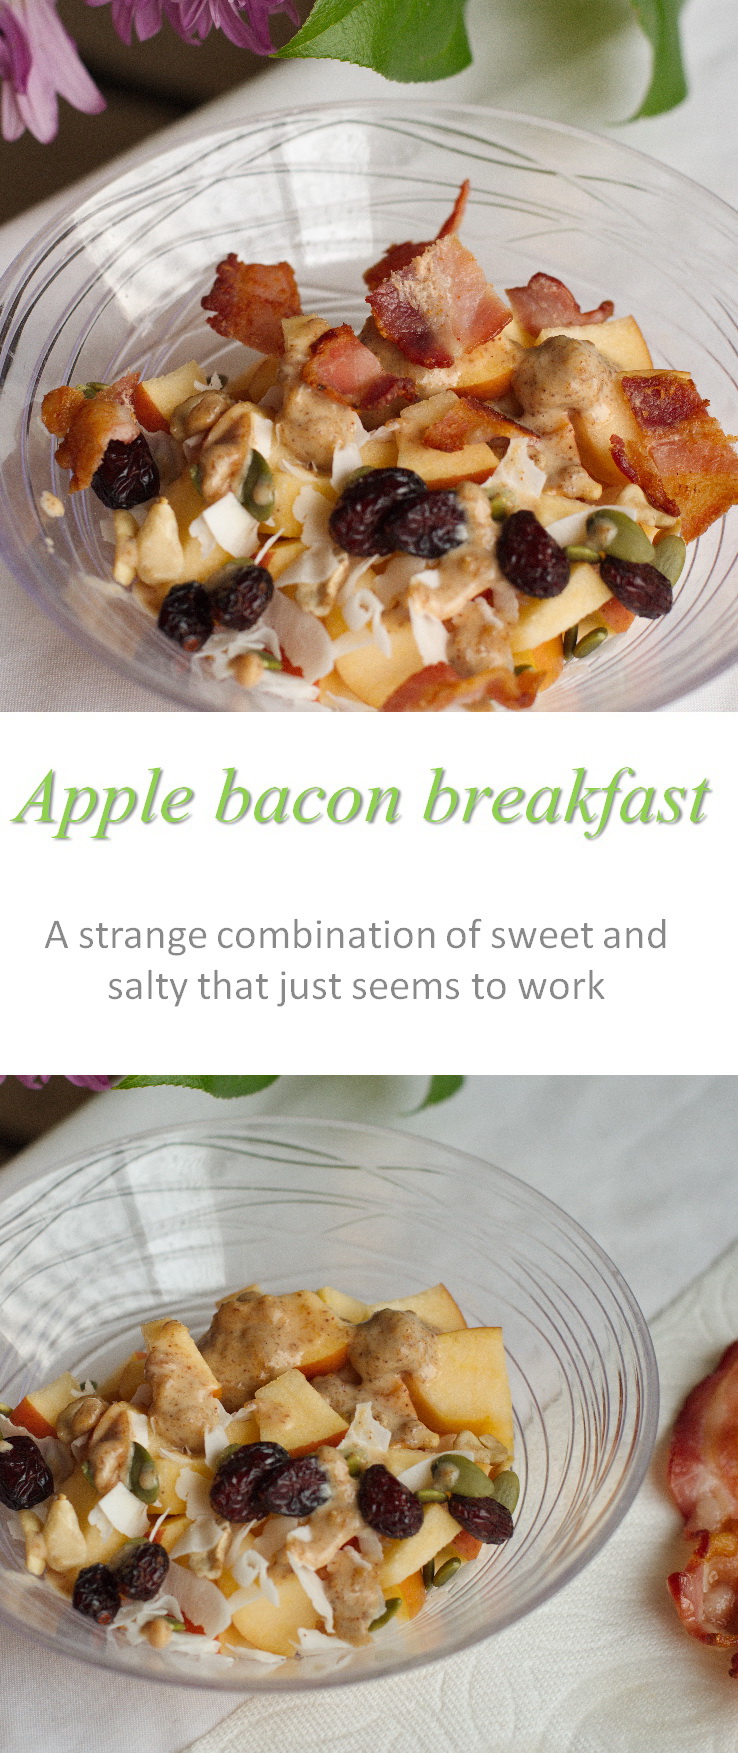 My strange but surprisingly yummy apple bacon breakfast - apple, trail mix, sunflower seed butter and ... bacon.  Because bacon makes everything better! #bacon #cookathome #glutenfree #dairyfree #paleo #whole30